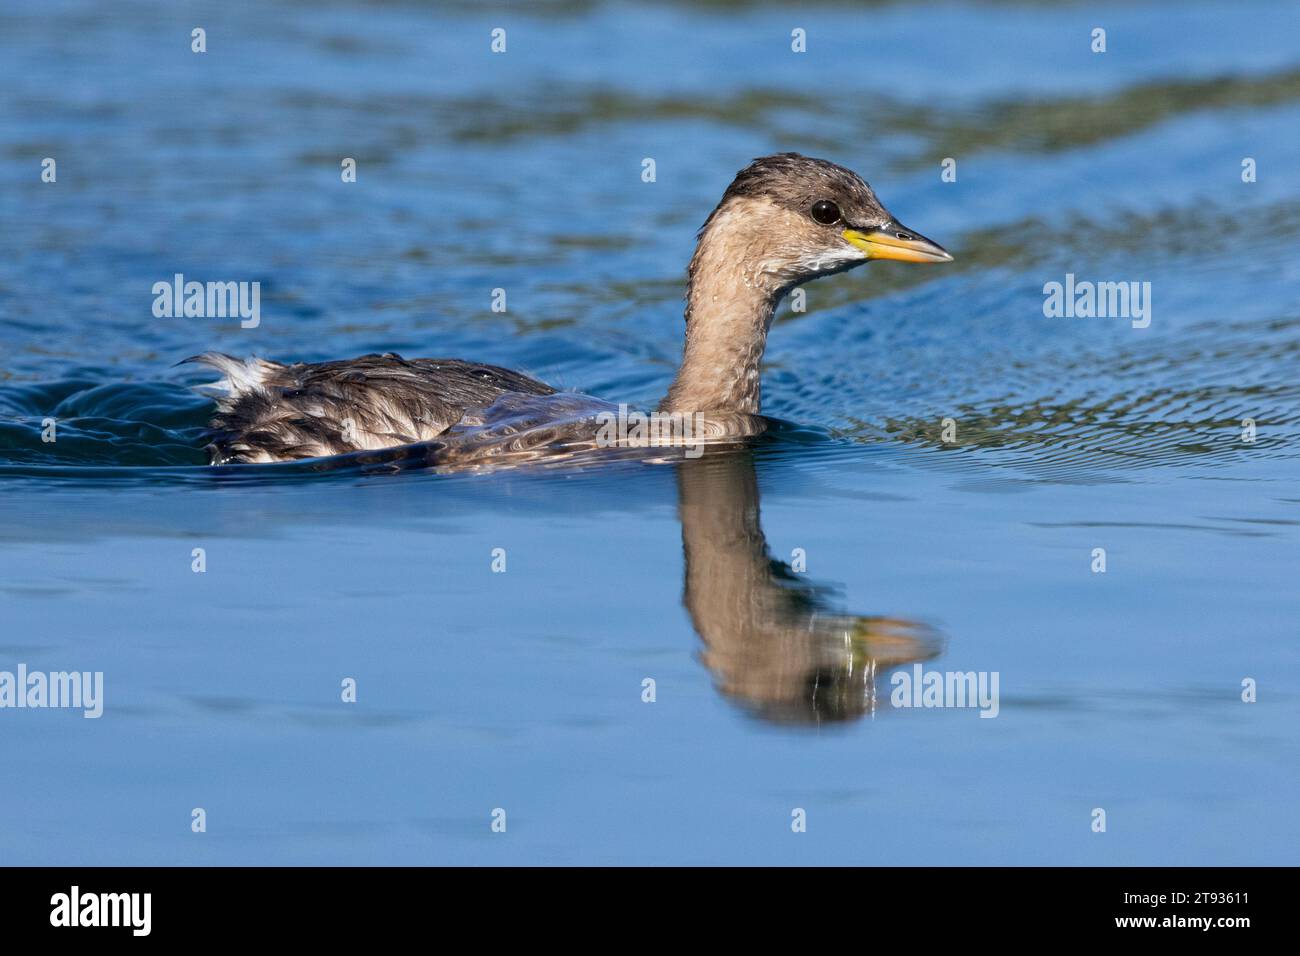 Little Grebe (Tachybaptus ruficollis), side view of an individual in winter plumage swimming in the water, Campania, Italy Stock Photo